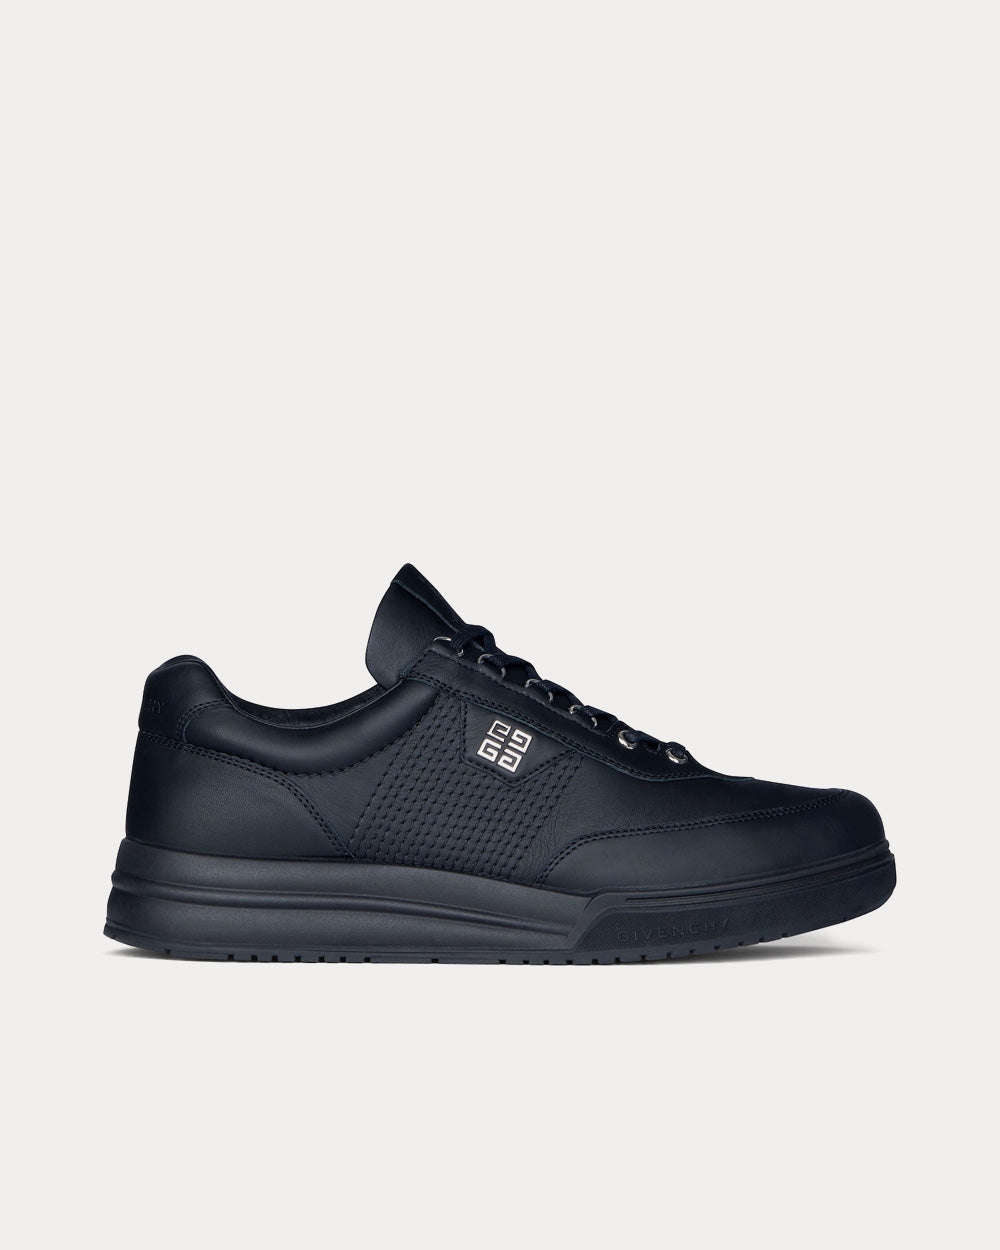 Givenchy G4 Low-Top Sneakers